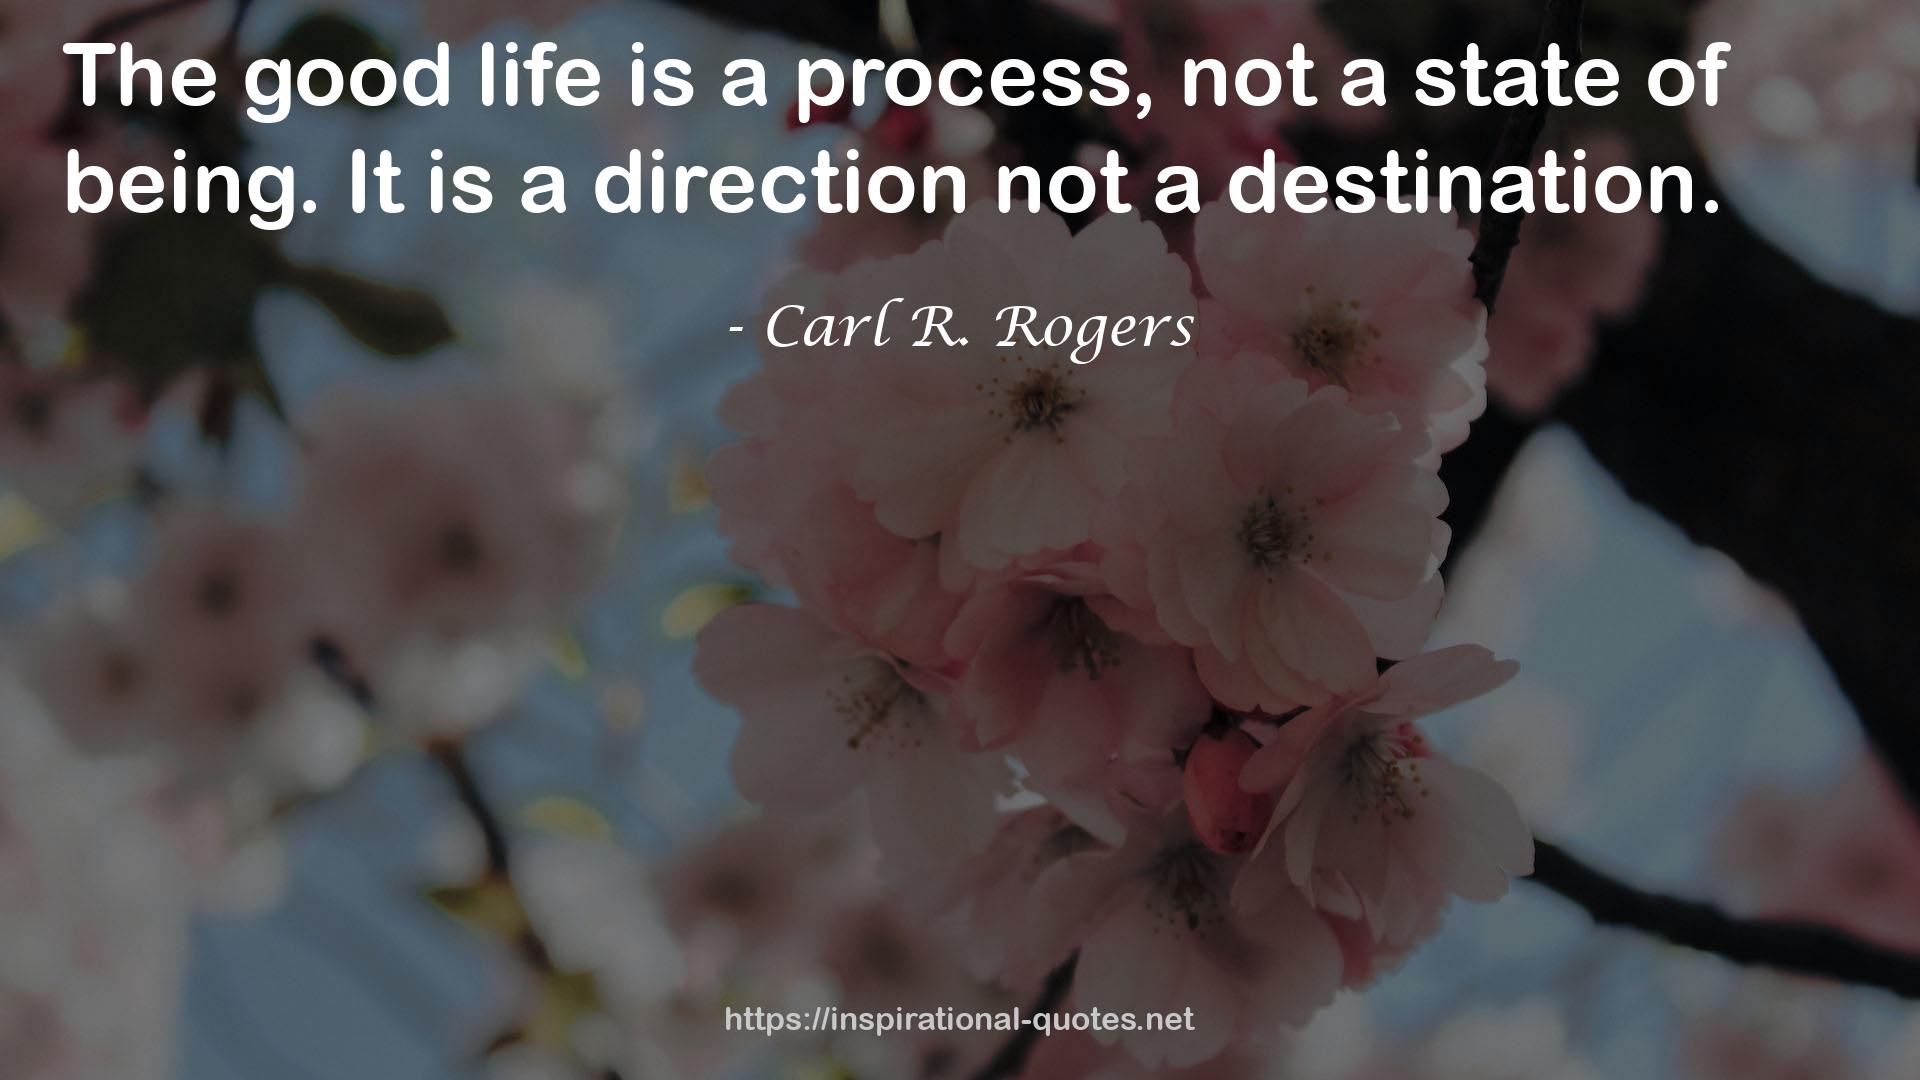 Carl R. Rogers QUOTES